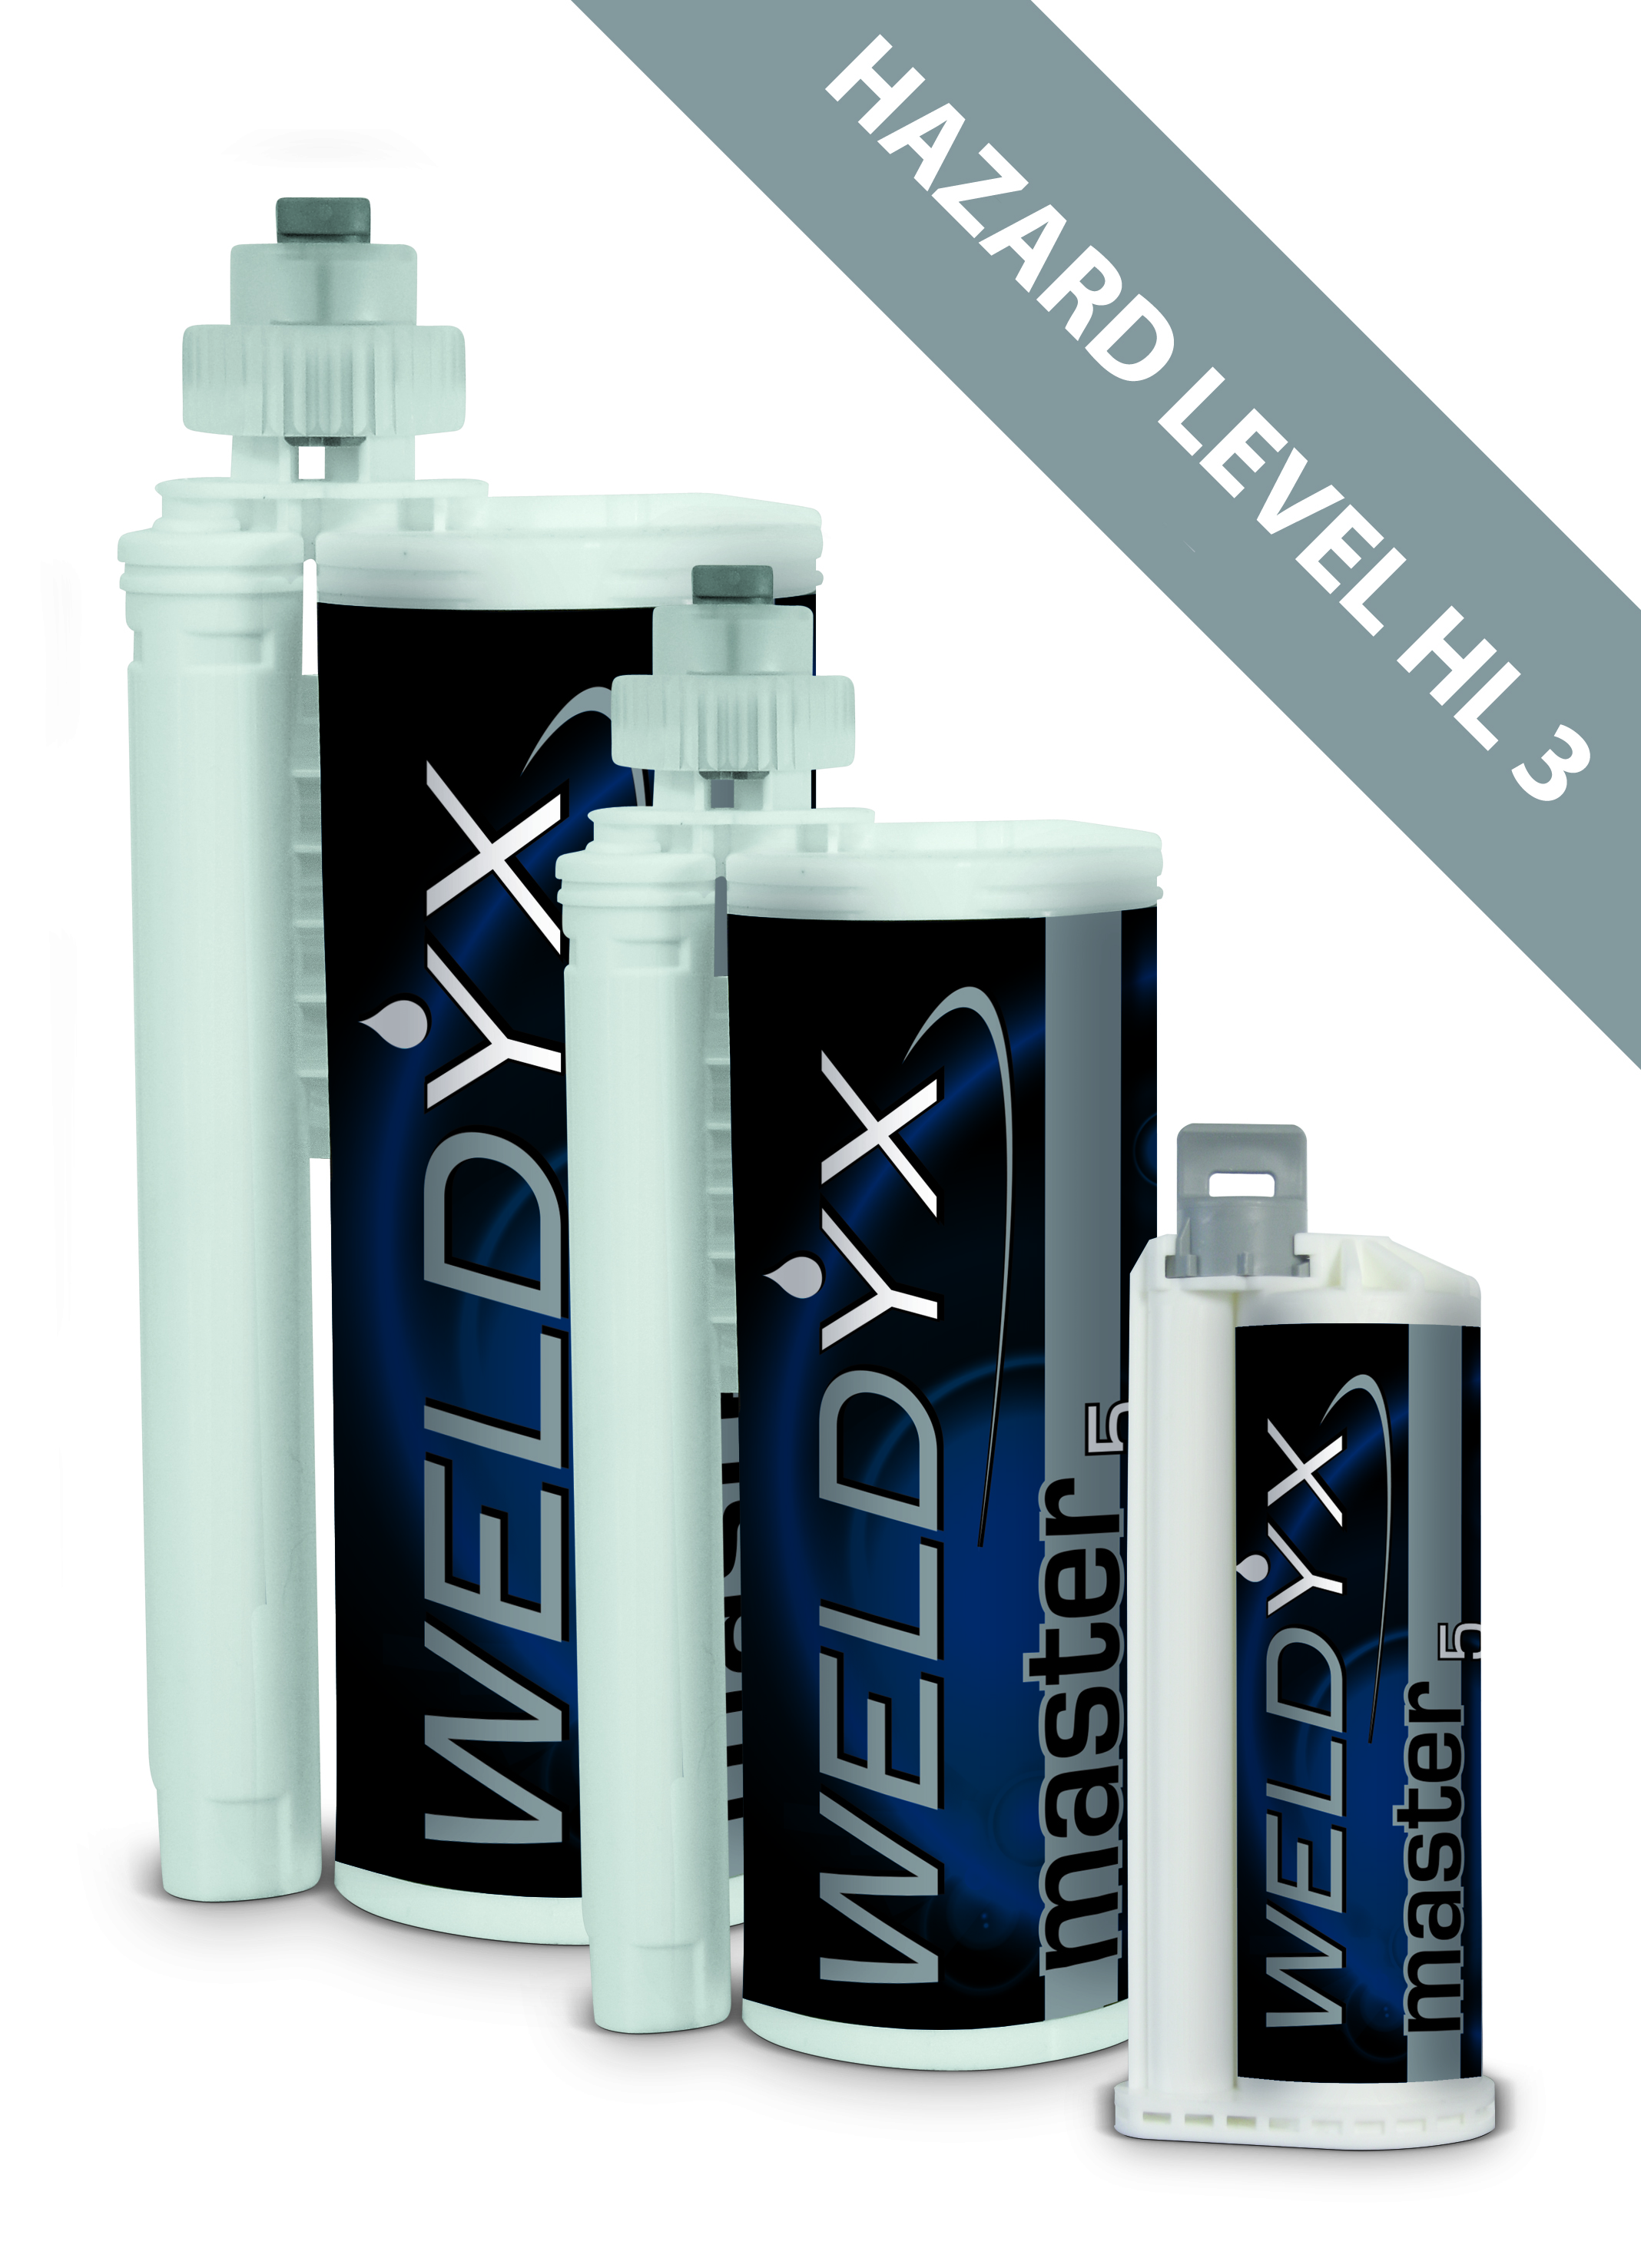 WELDYX MASTER 5: Certified High-performance adhesive with 5 min open time, Hazard Level 3